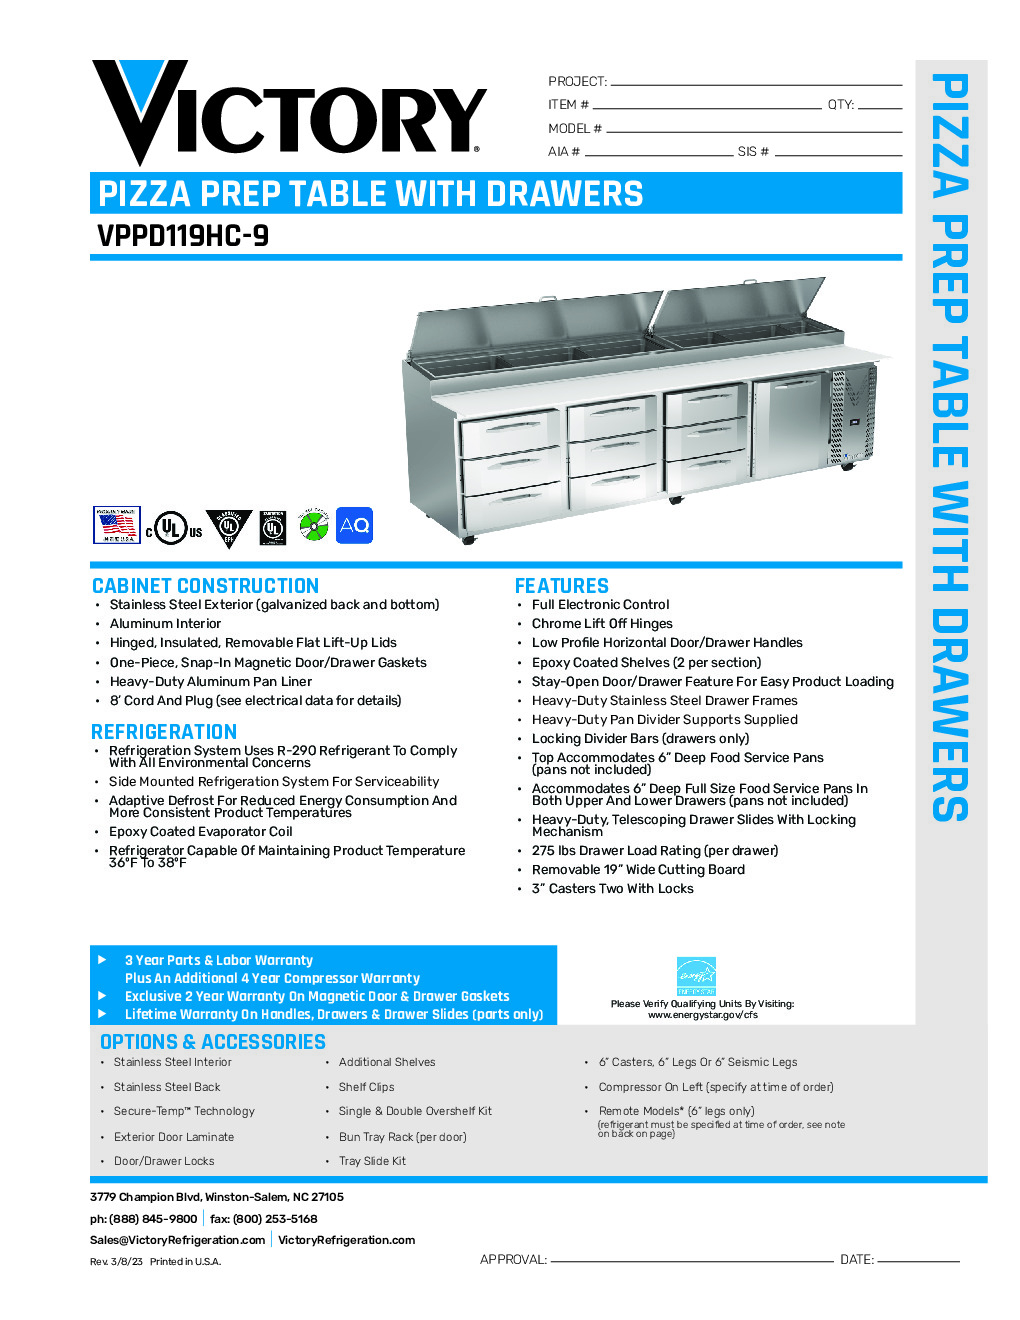 Victory VPPD119HC-9 Pizza Prep Table Refrigerated Counter